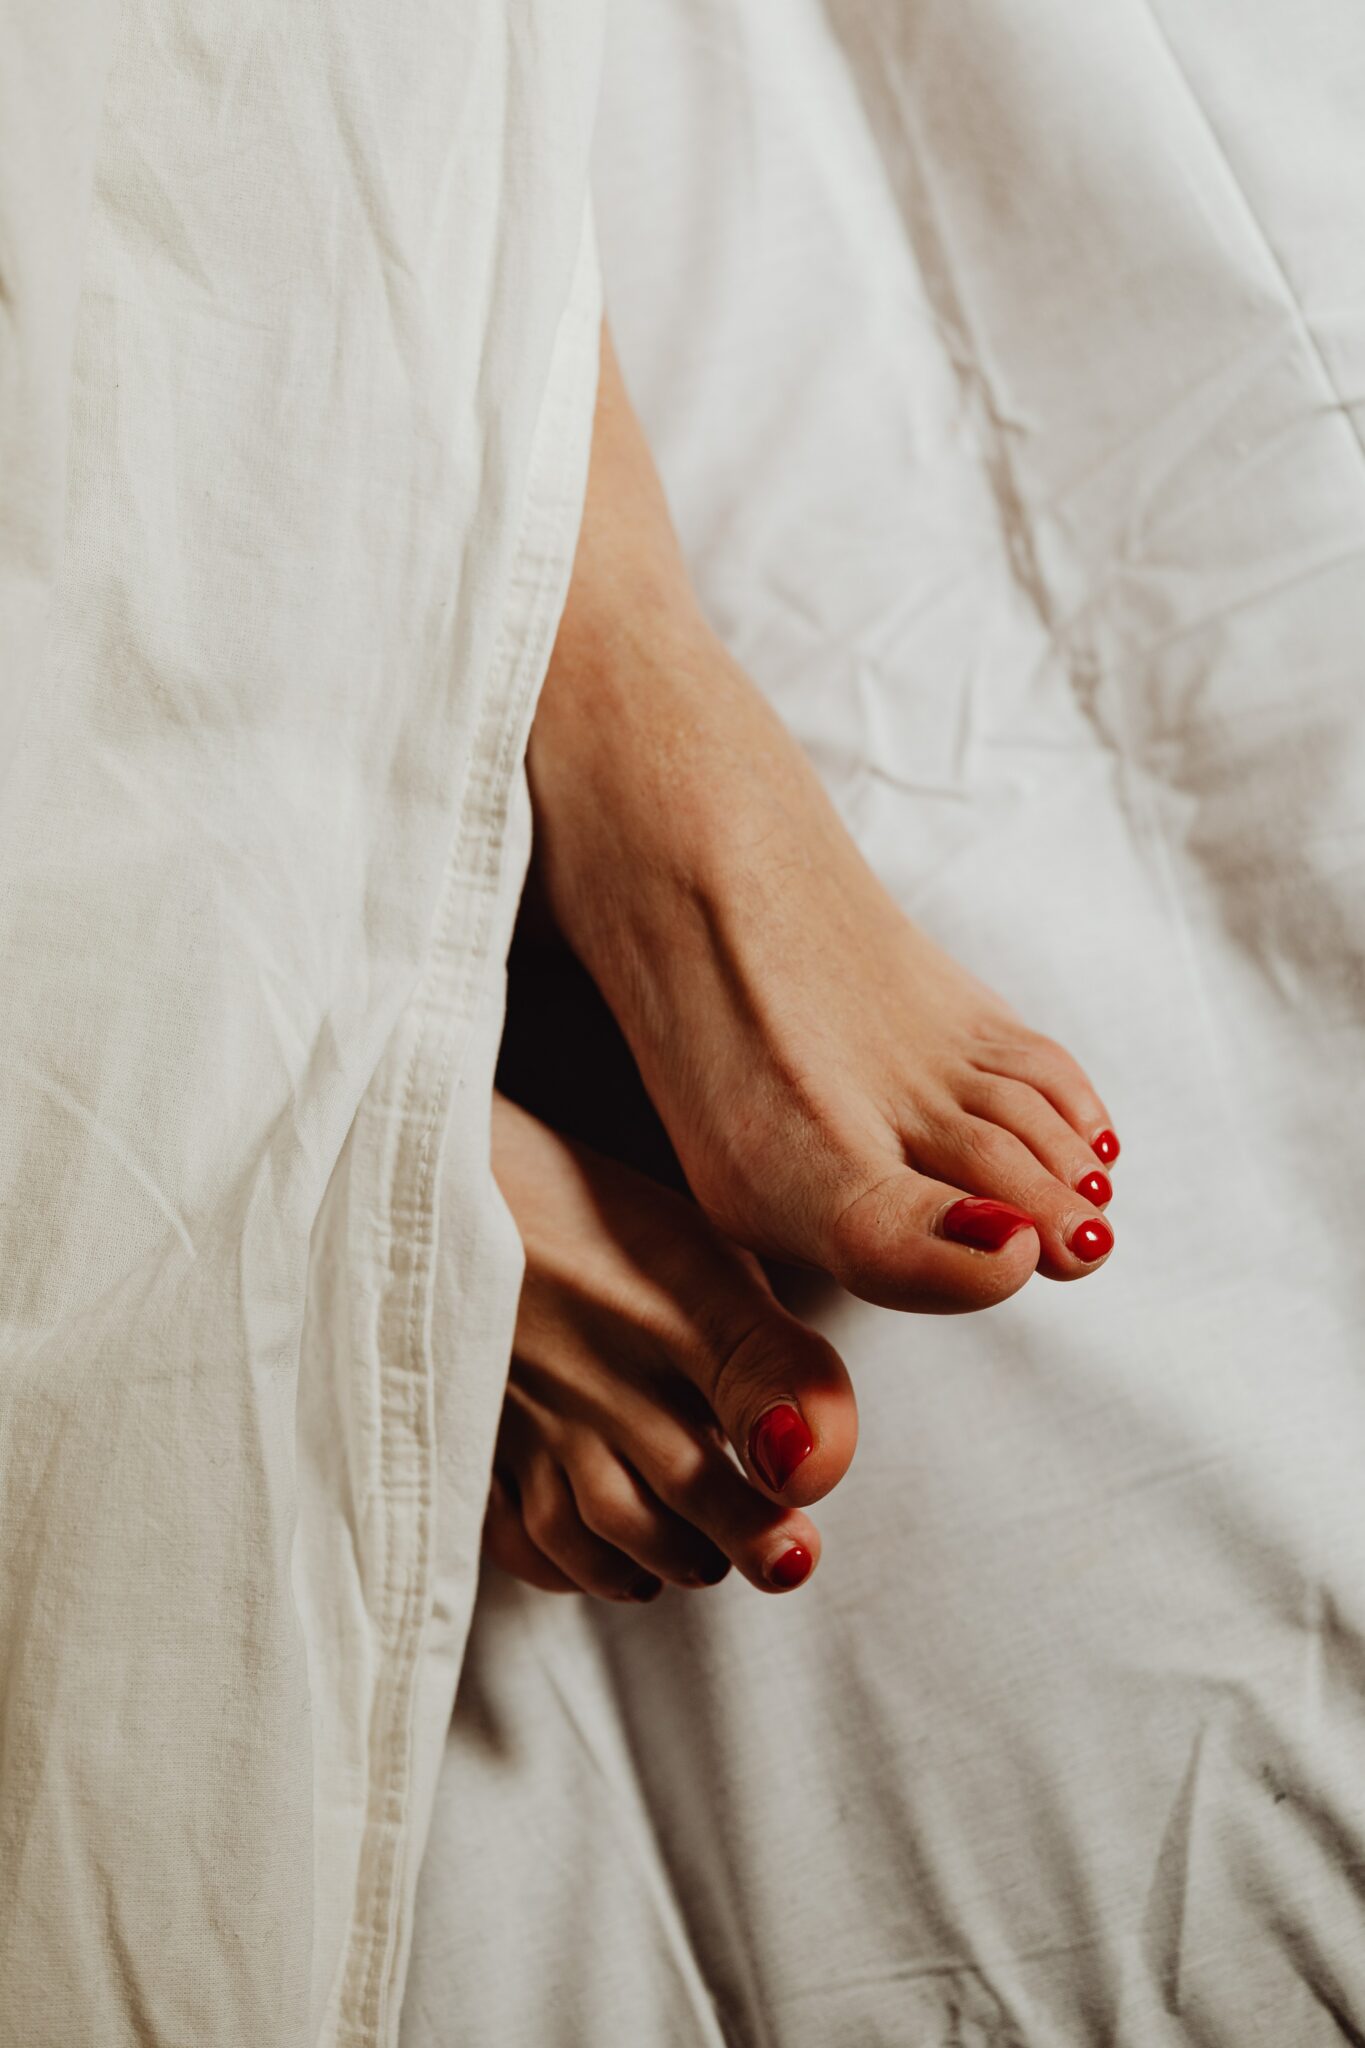 Feet peaking out of white bed covers with red nail polish.